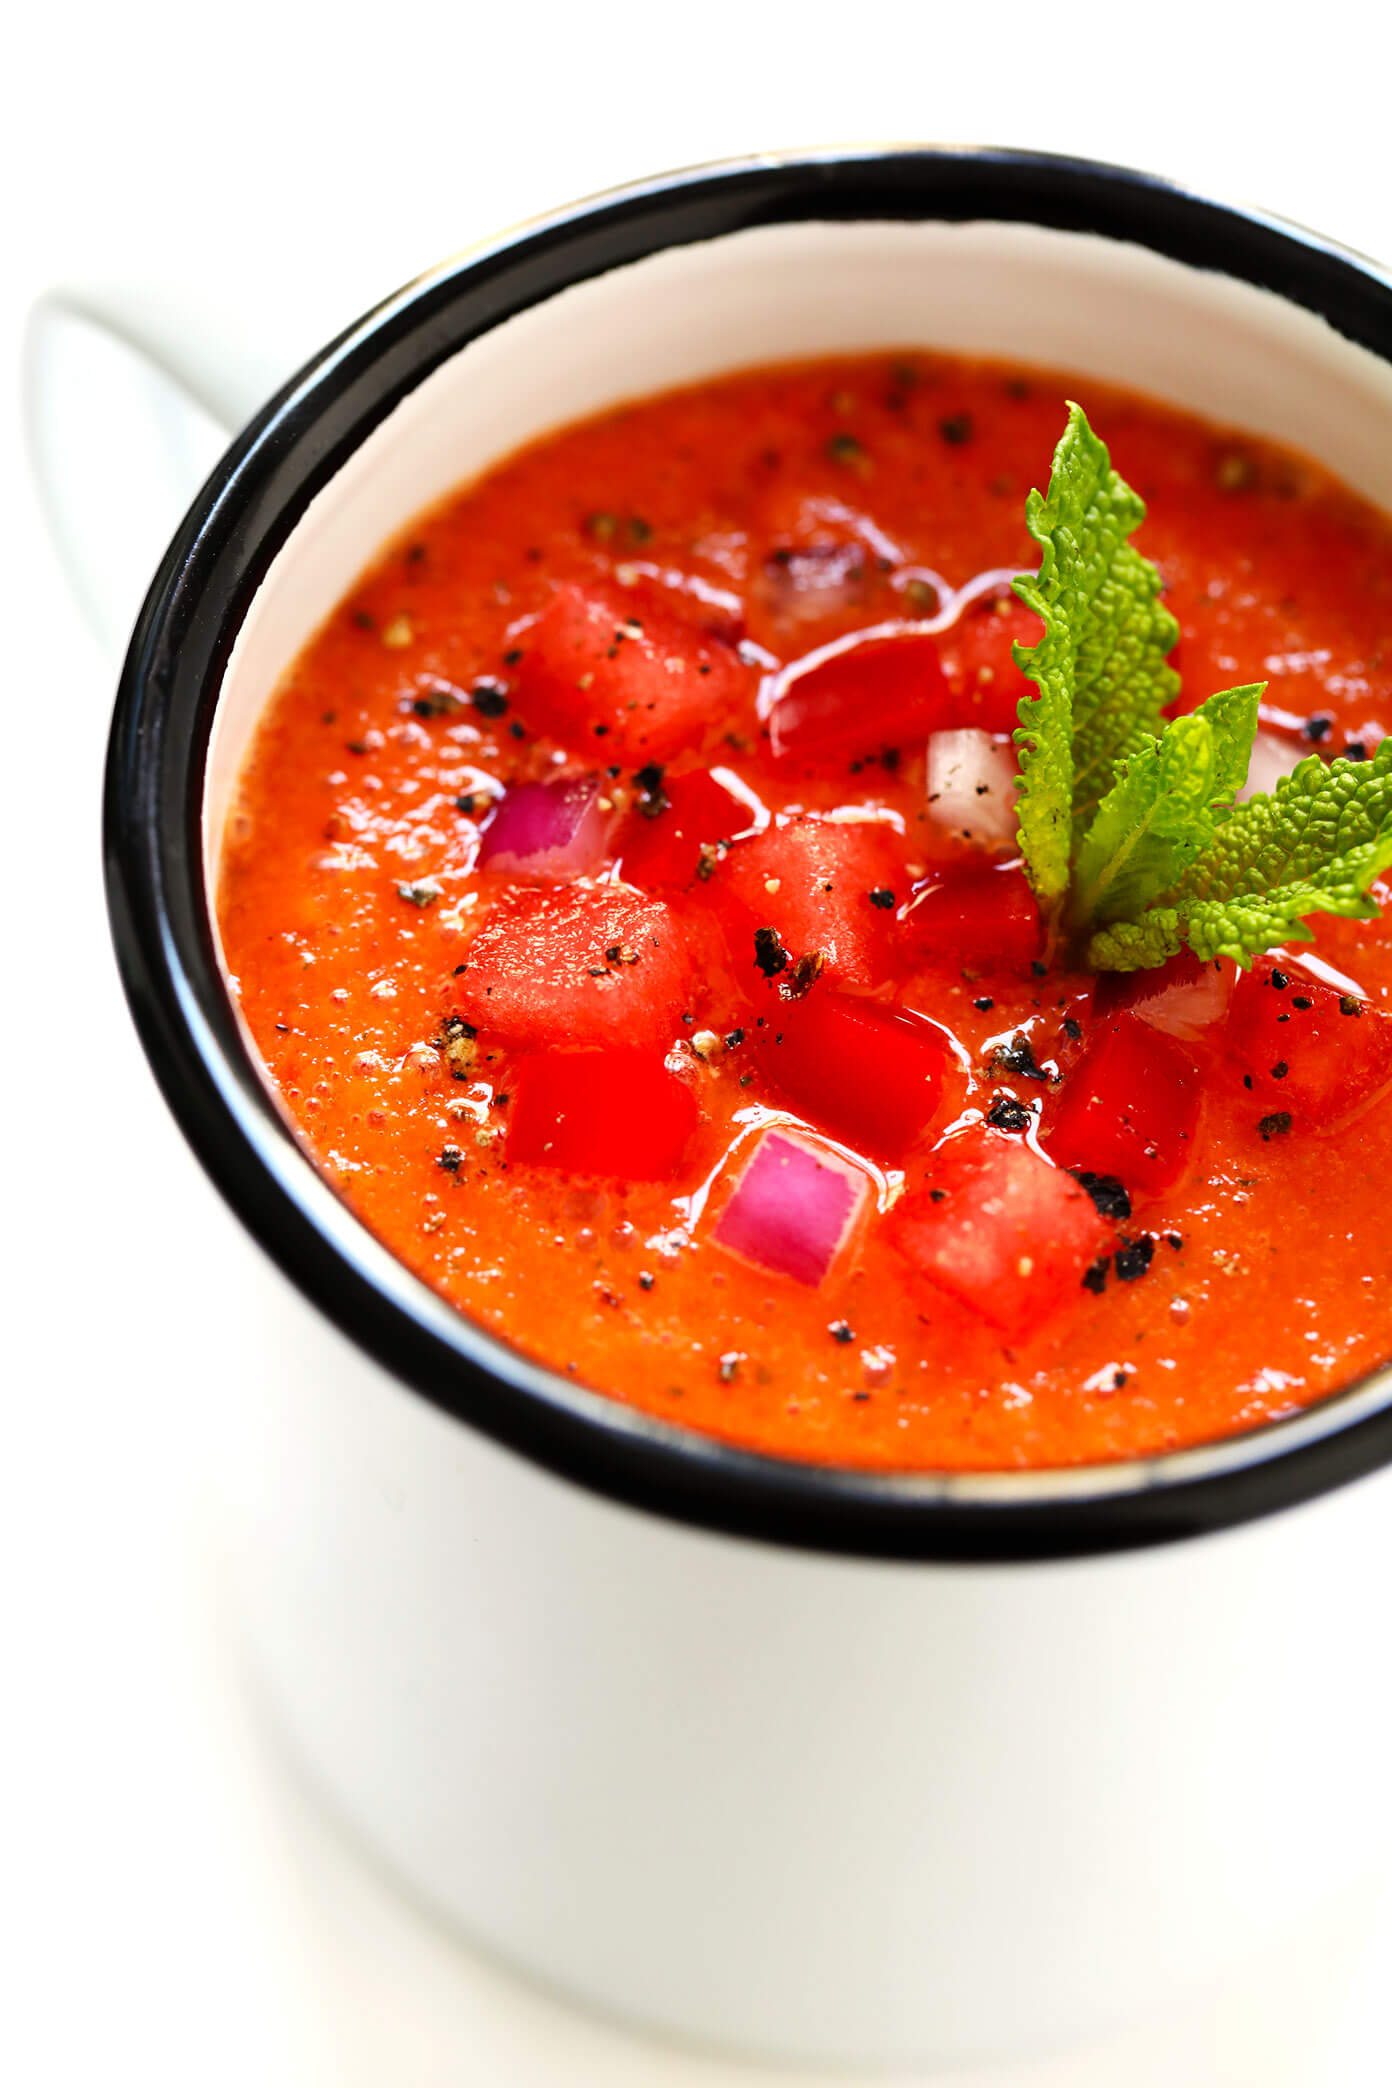 How To Make Gazpacho with Watermelon